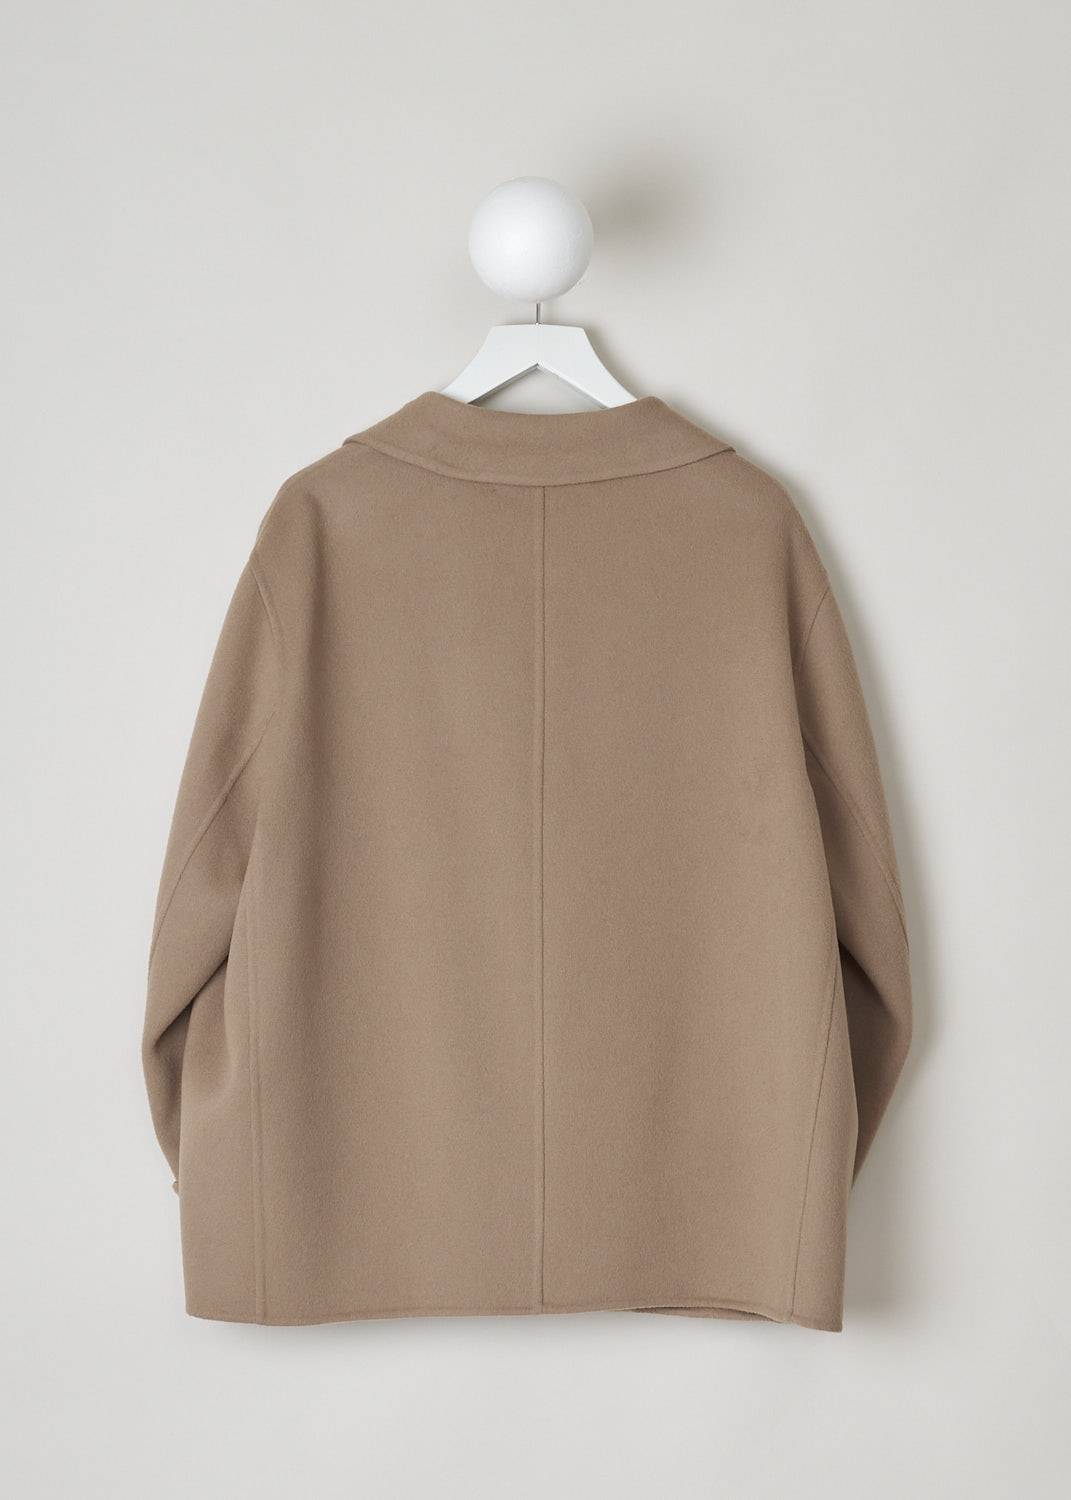 MARNI, CAMEL COLORED WOOL-BLEND COAT, GIMA0161KO_TW840_00M02, Brown, Back, This short camel-colored coat has an wider silhouette. The coat has a notched lapel and a front button closure. On the front, the coat has two welt pockets with flap. The long sleeves have rolled cuffs. The coat has a vertical centre seam across the back. 
